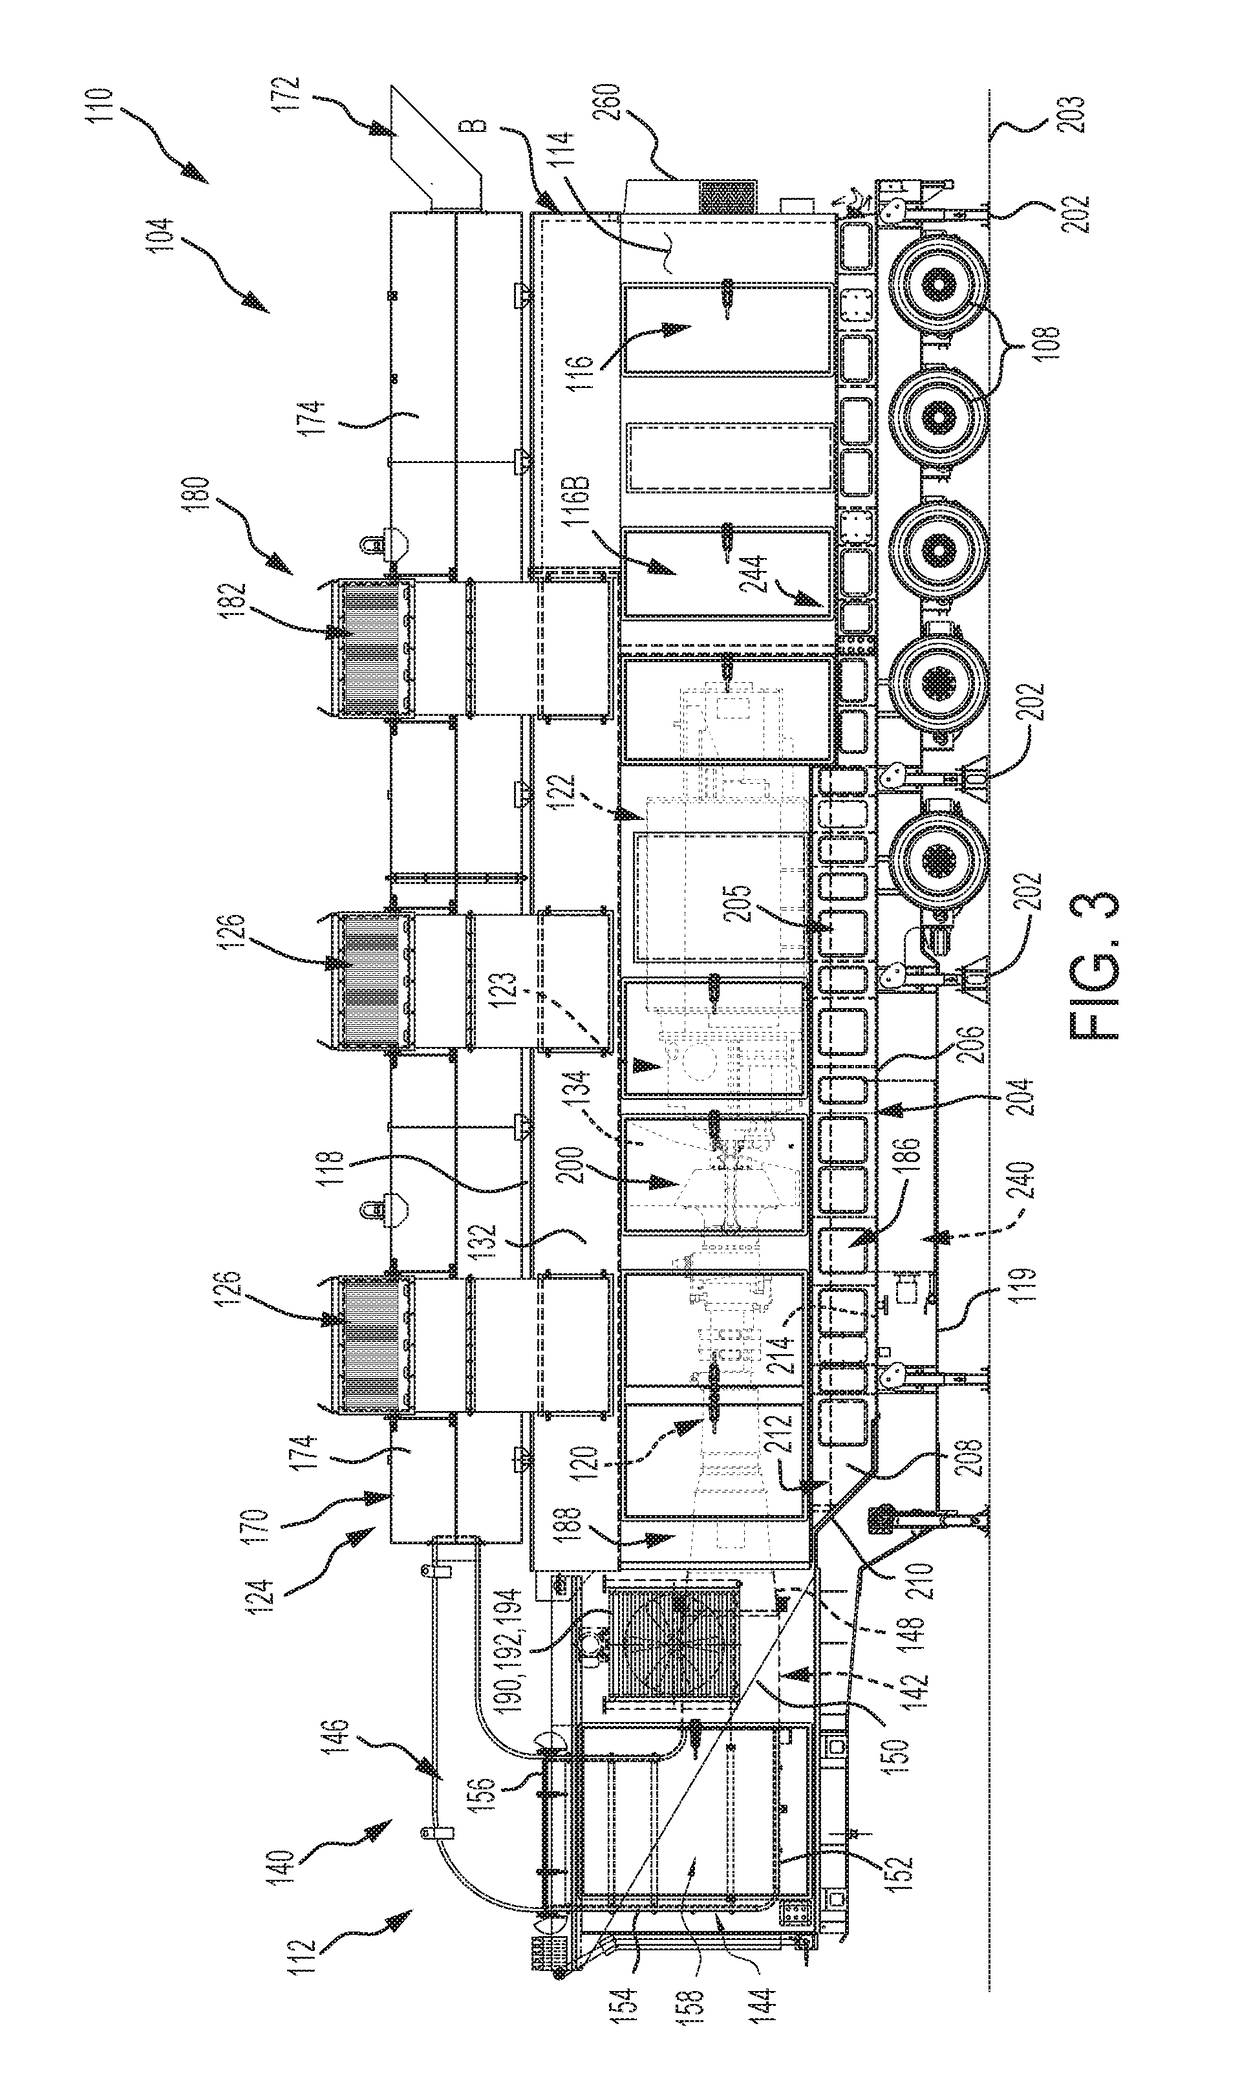 Mobile power generation system including closed cell base structure